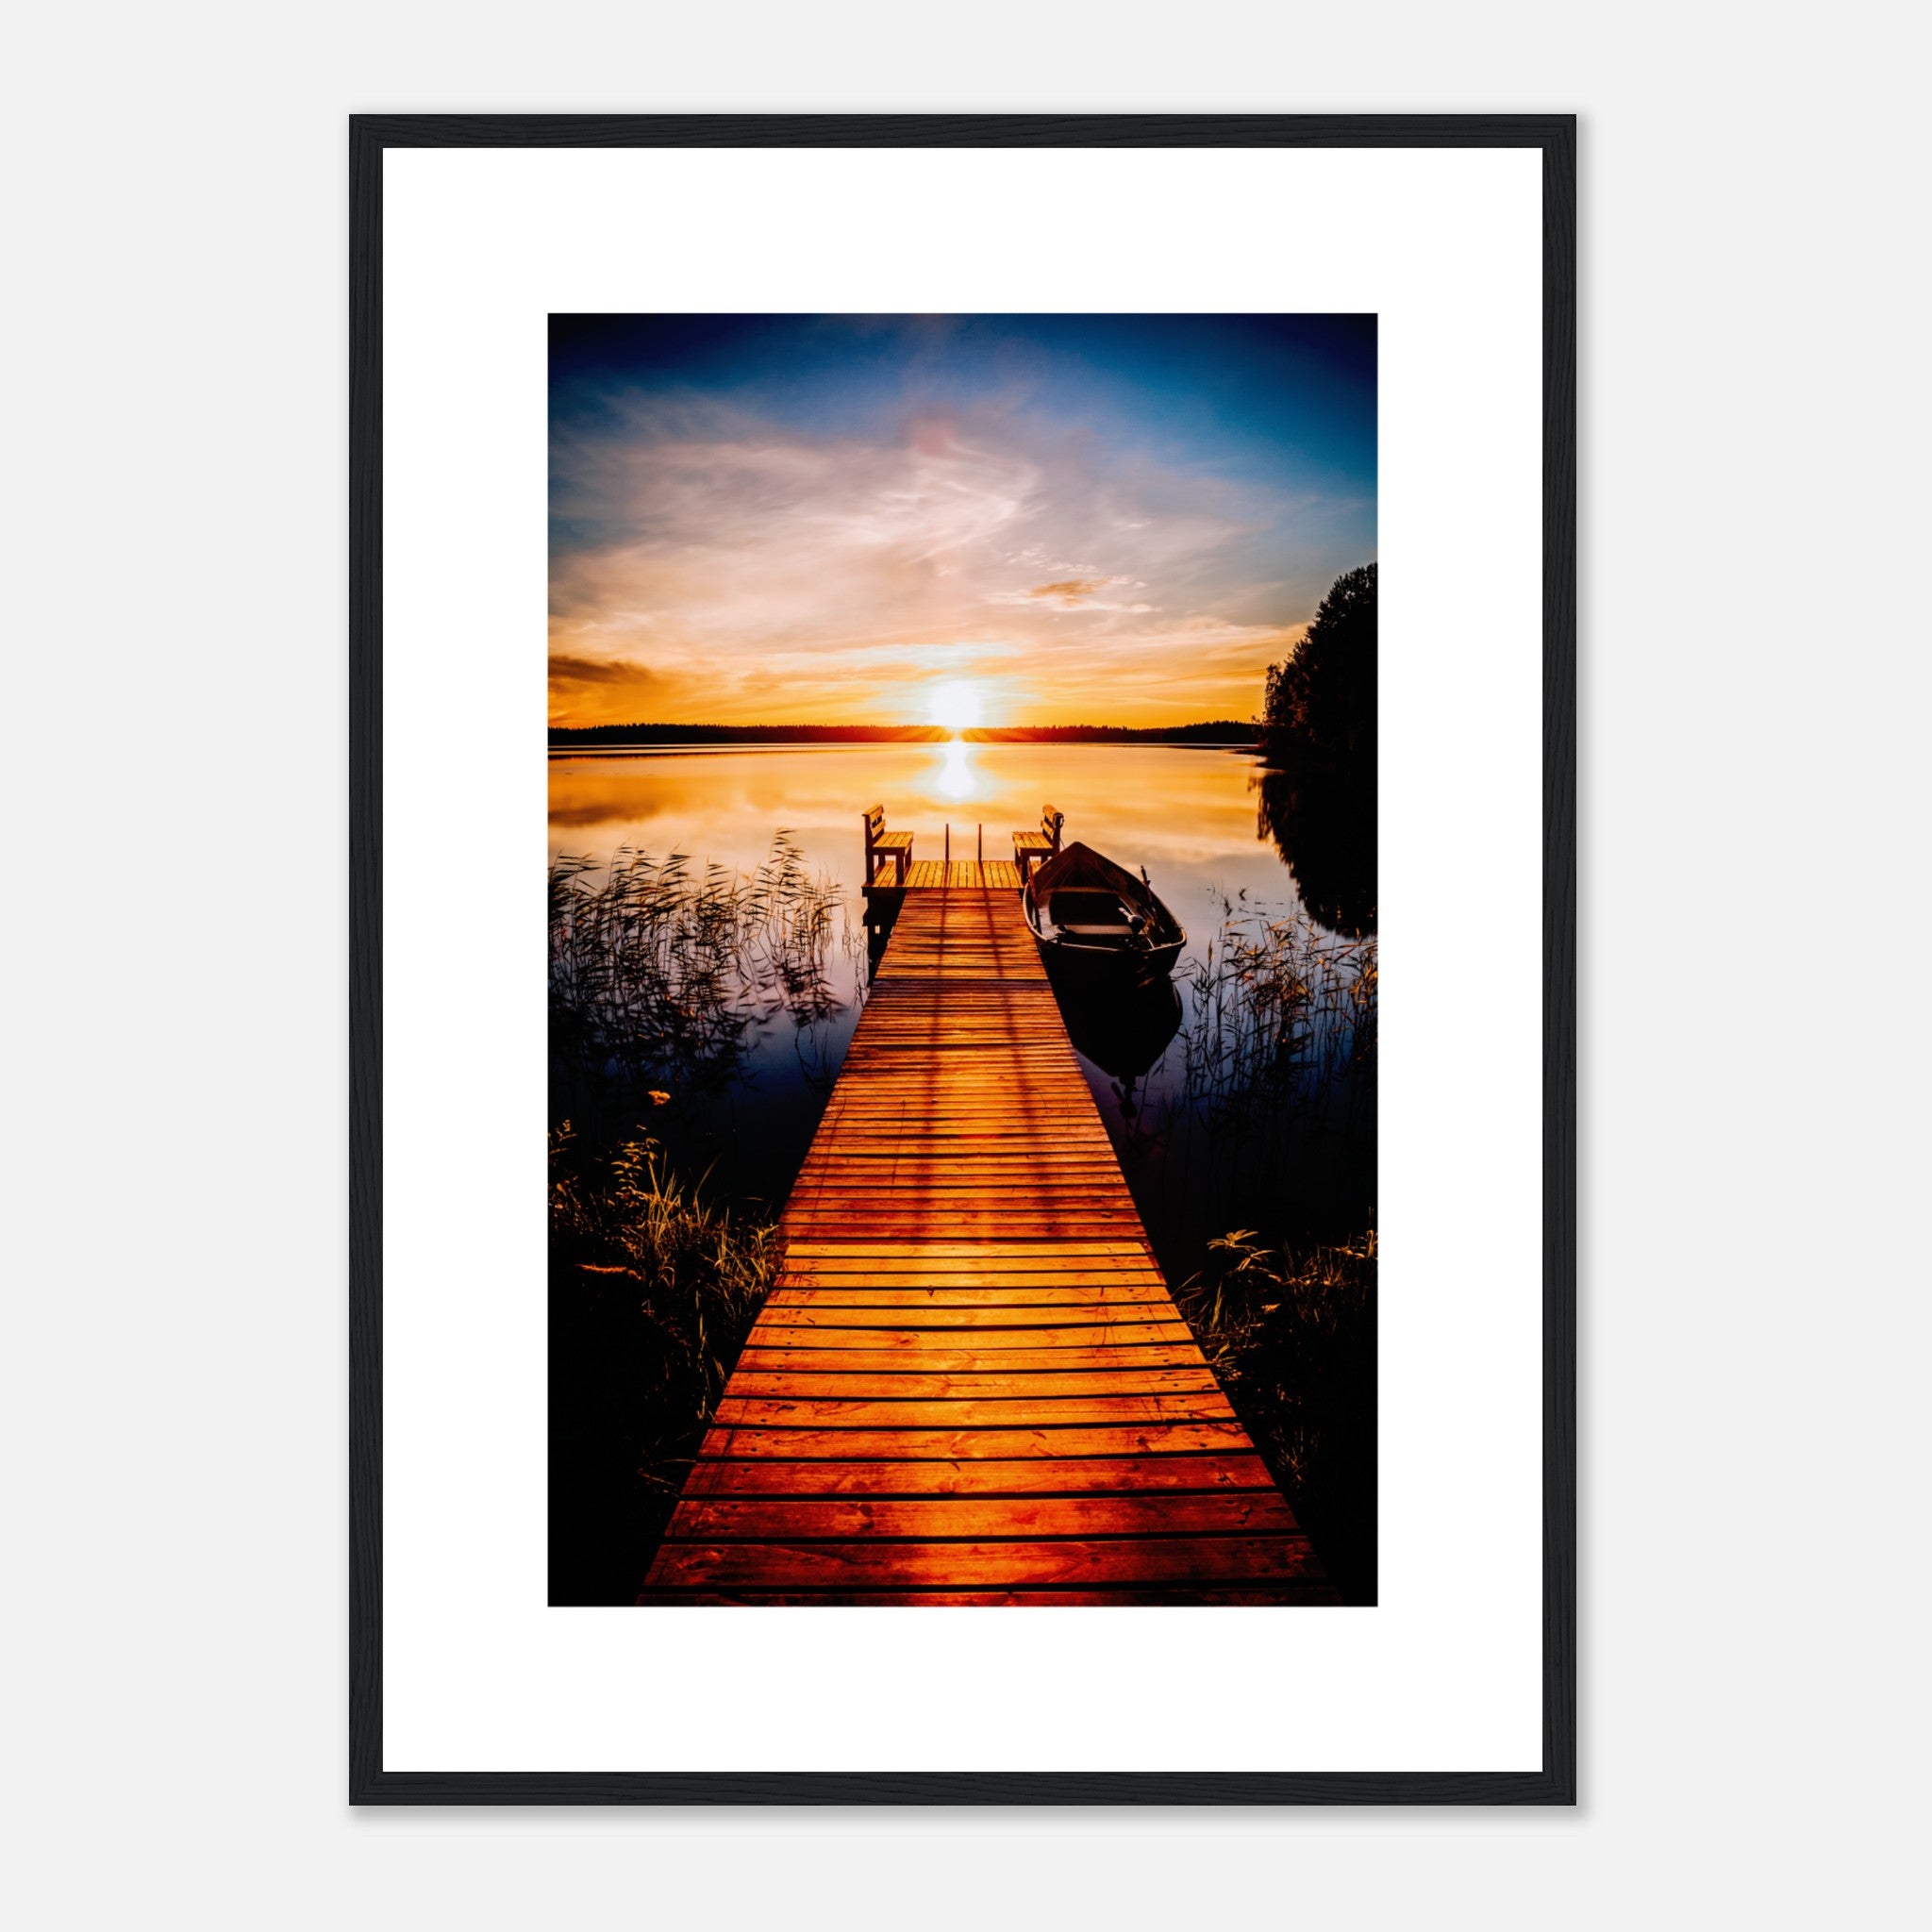 Sunset Over The Fishing Pier At The Lake In Finland Poster